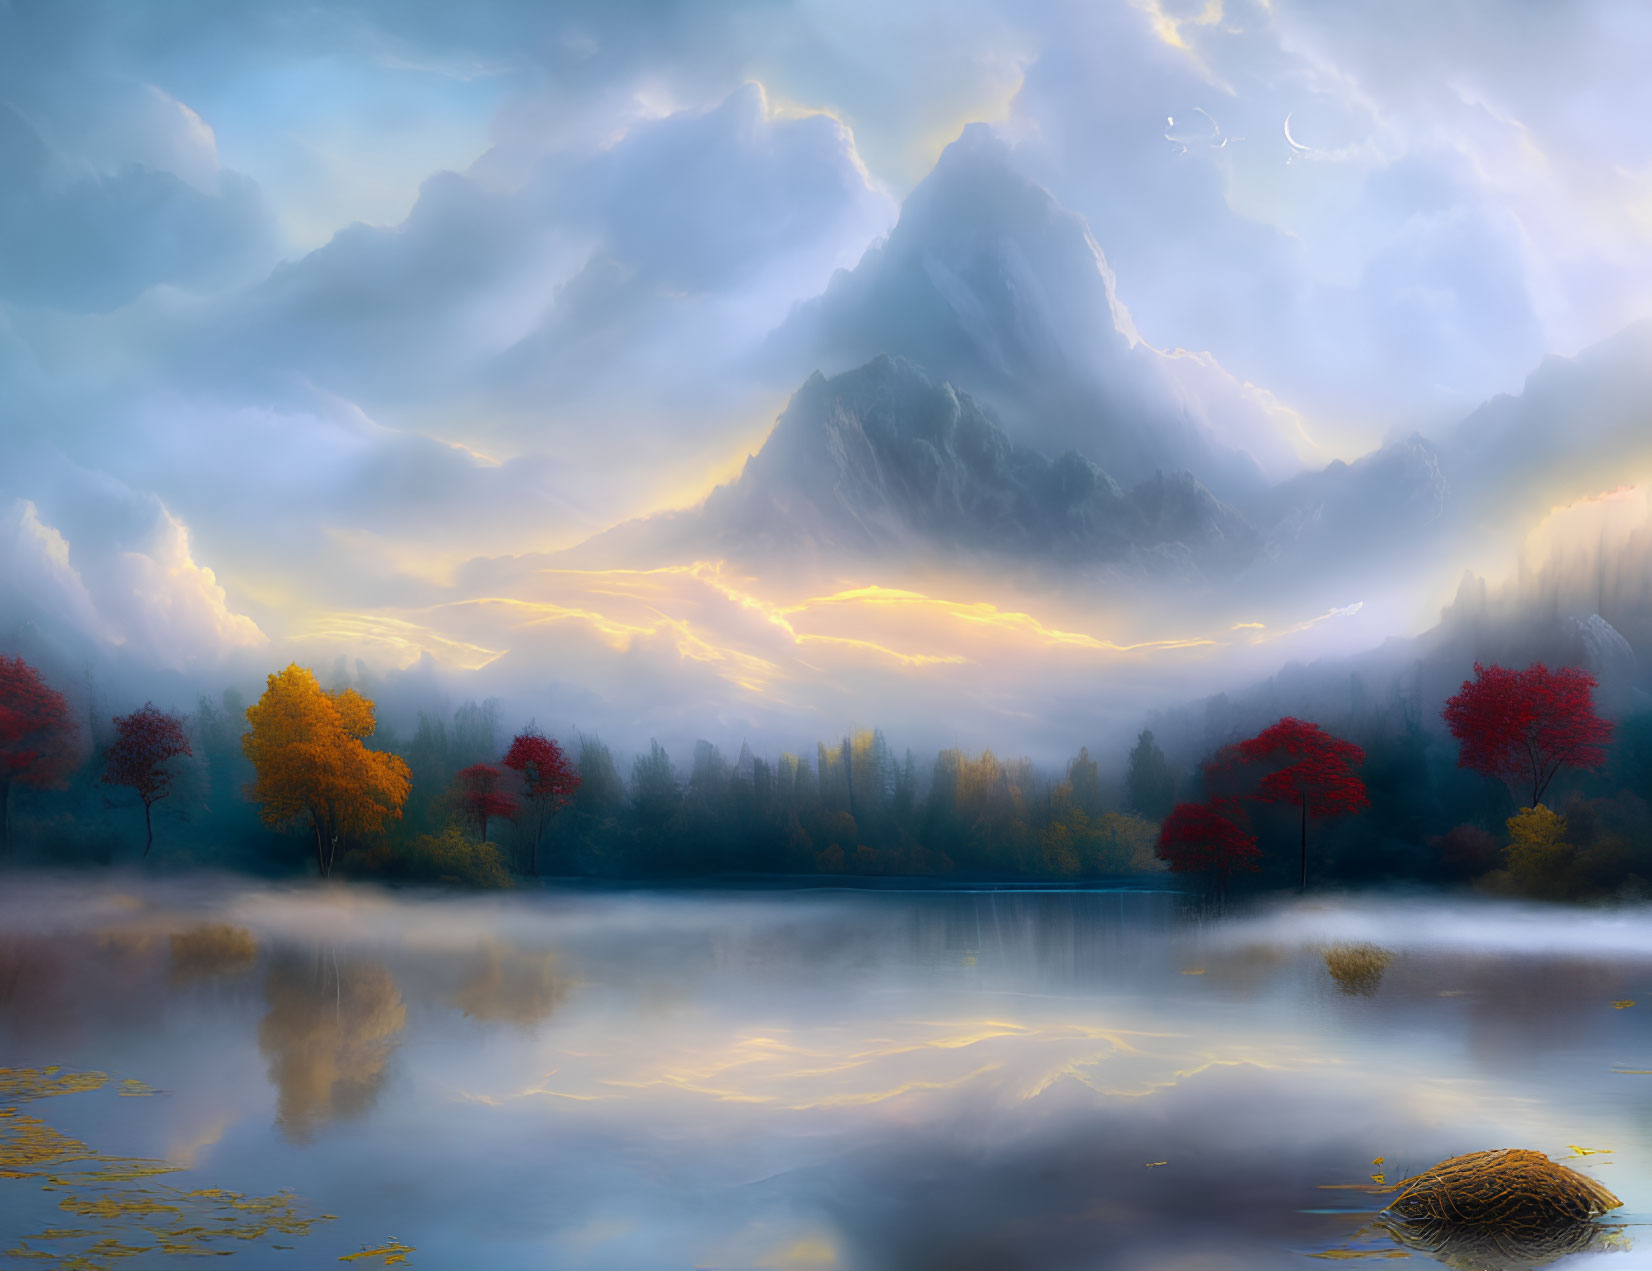 Mountain landscape with sunlit clouds over tranquil lake and autumn trees